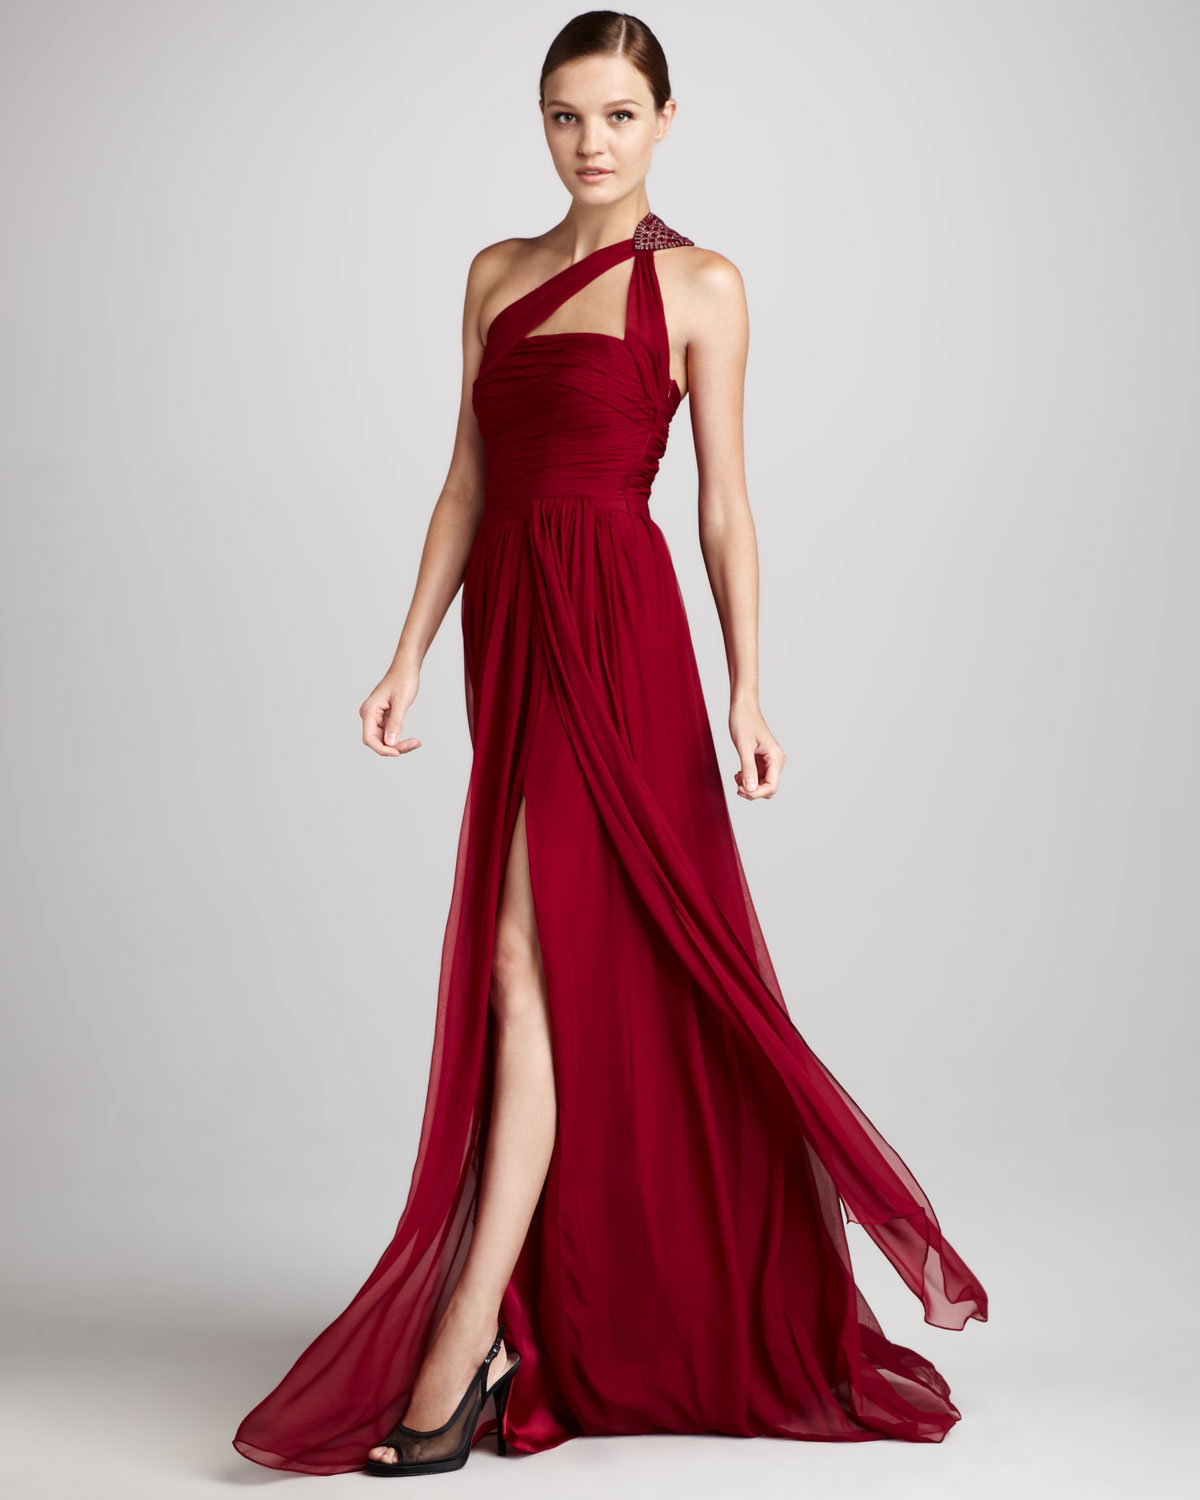 Lyst - Ml Monique Lhuillier One-shoulder Beaded Chiffon Gown in Red